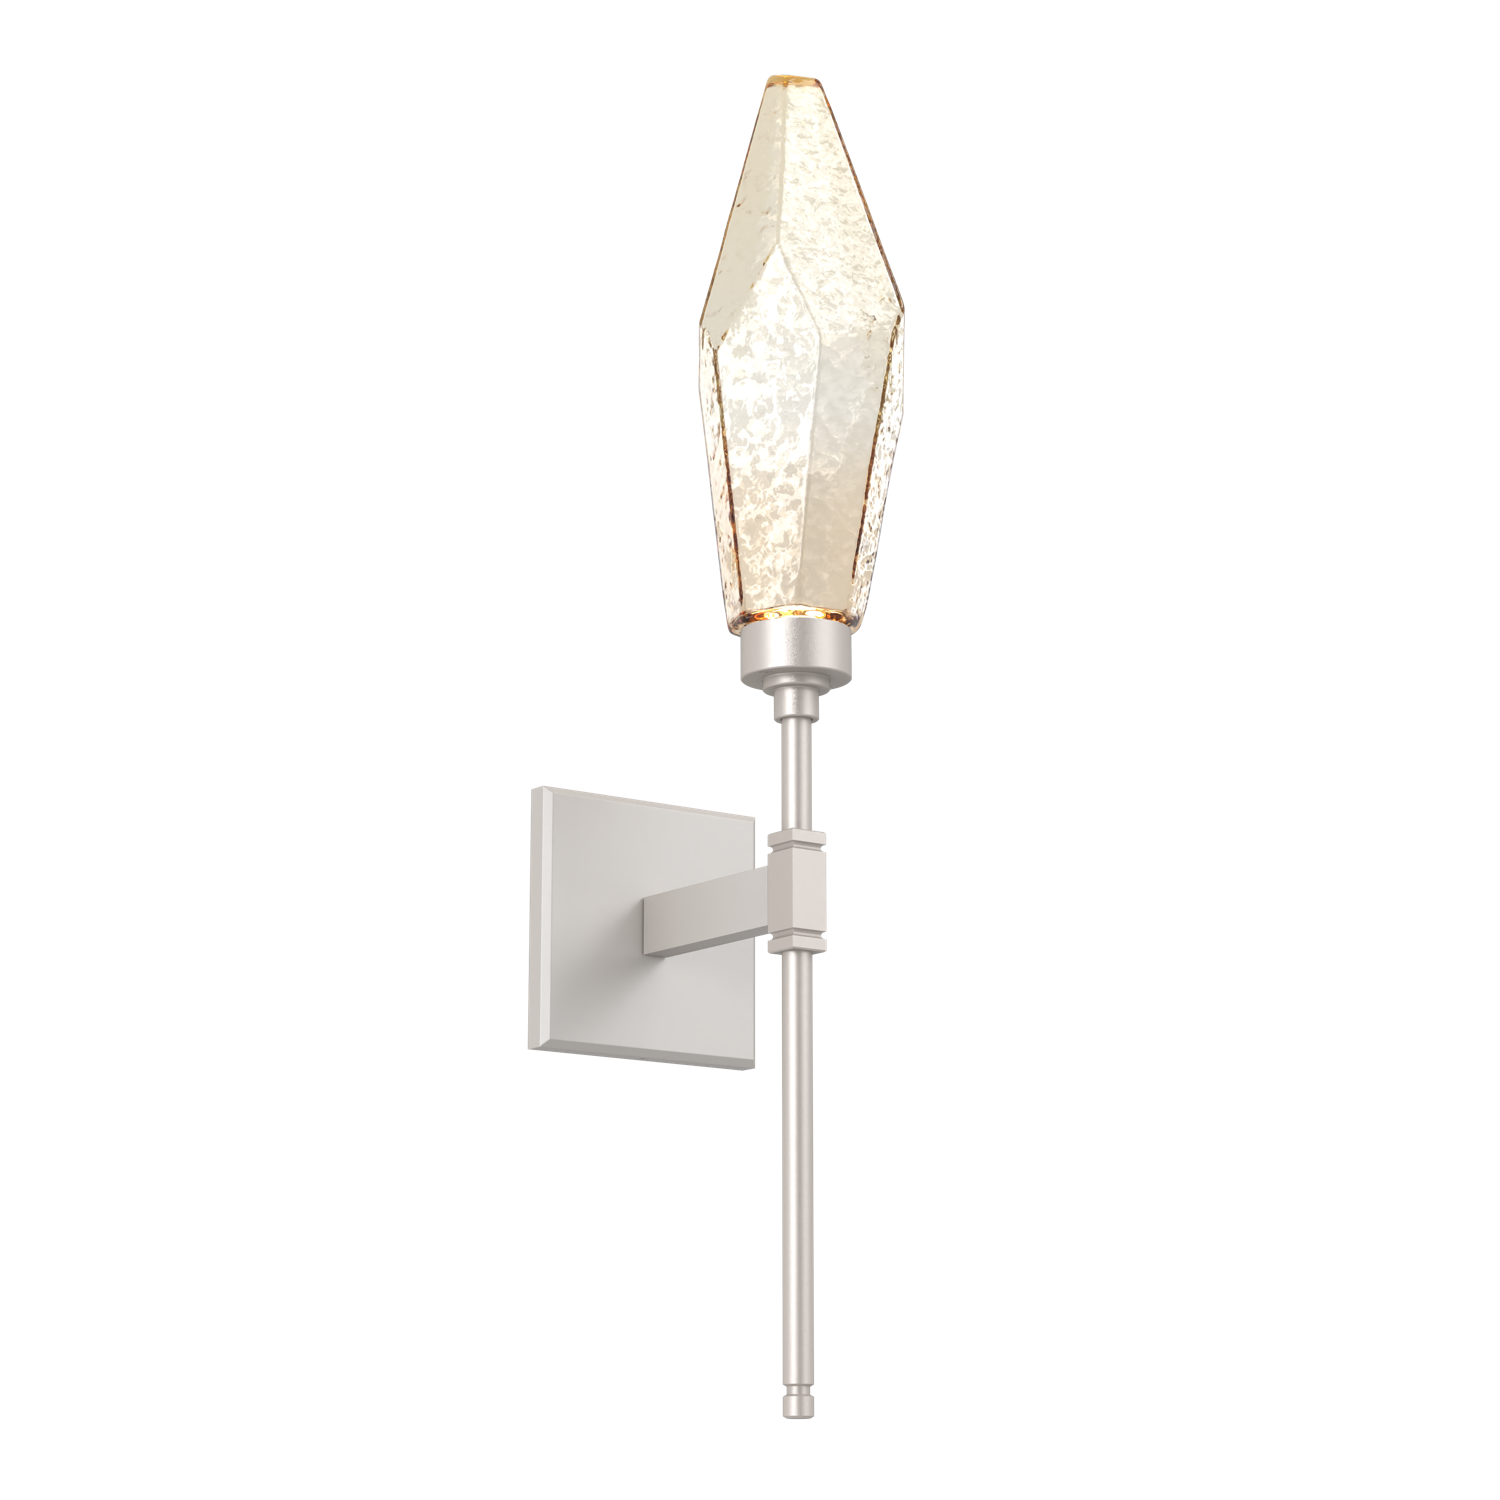 IDB0050-07-BS-CA-Hammerton-Studio-Rock-Crystal-belvedere-wall-sconce-with-beige-silver-finish-and-chilled-amber-blown-glass-shades-and-LED-lamping